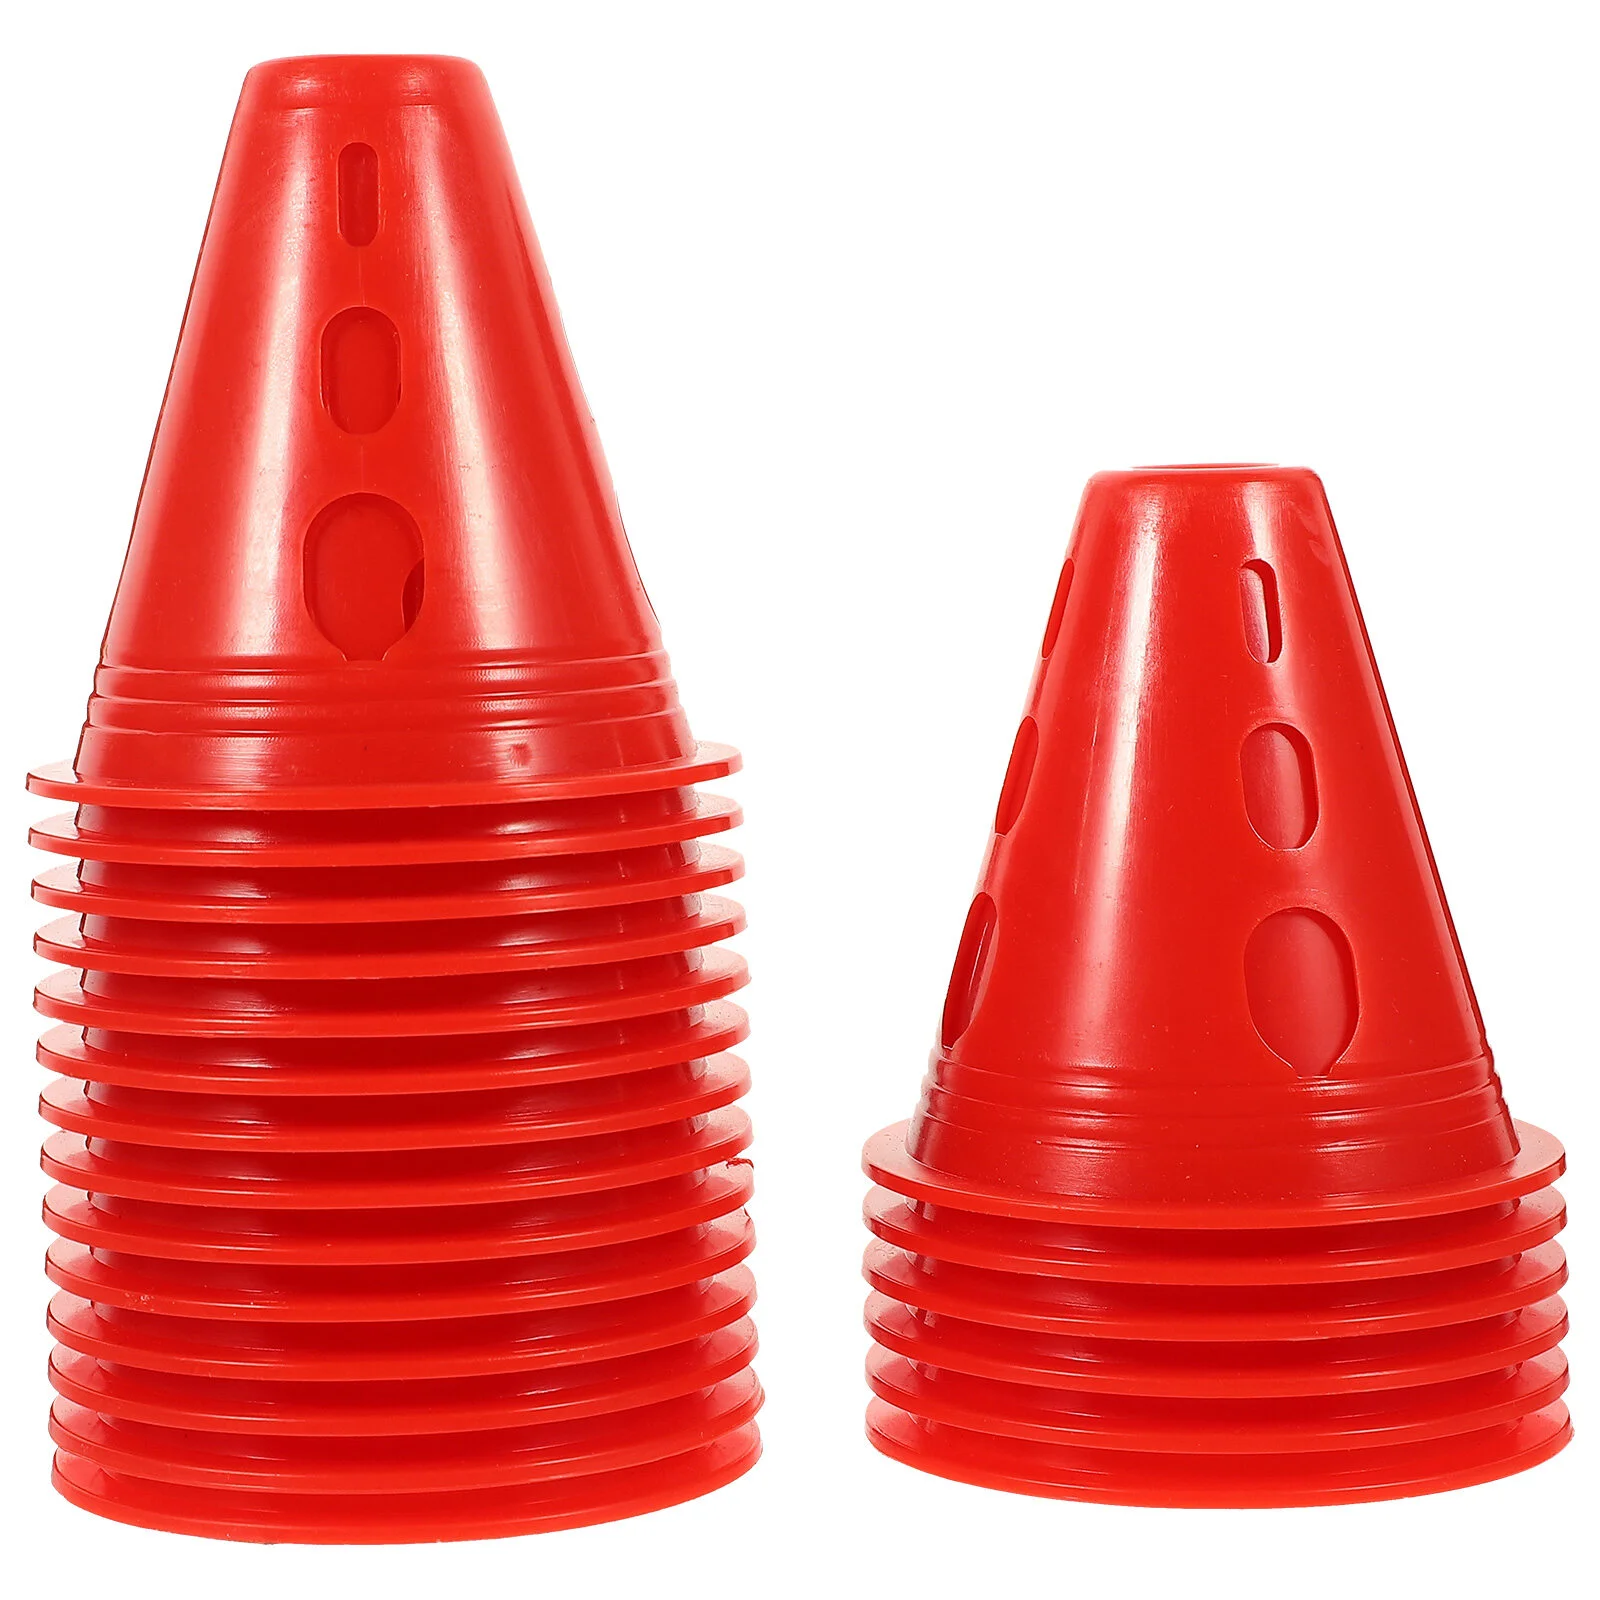 

20 Pcs Mini Footballs The Sign Gym Sports Training Cone Hole Cones Markers Roller Skate Plastic Obstacle Course Indoor